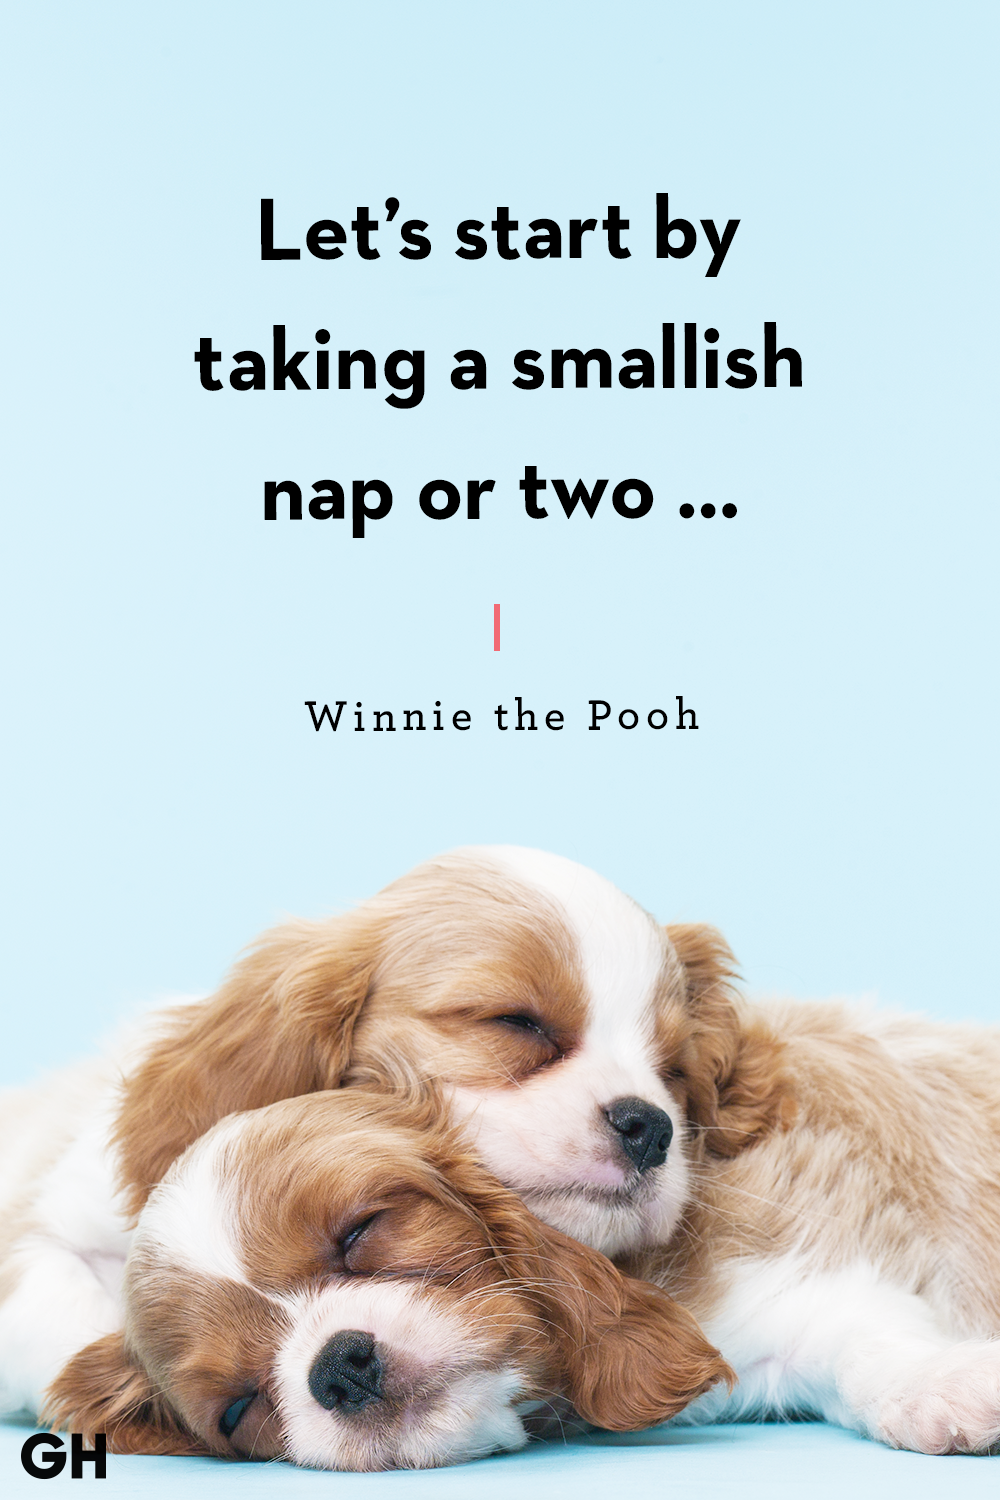 cute sleeping quotes